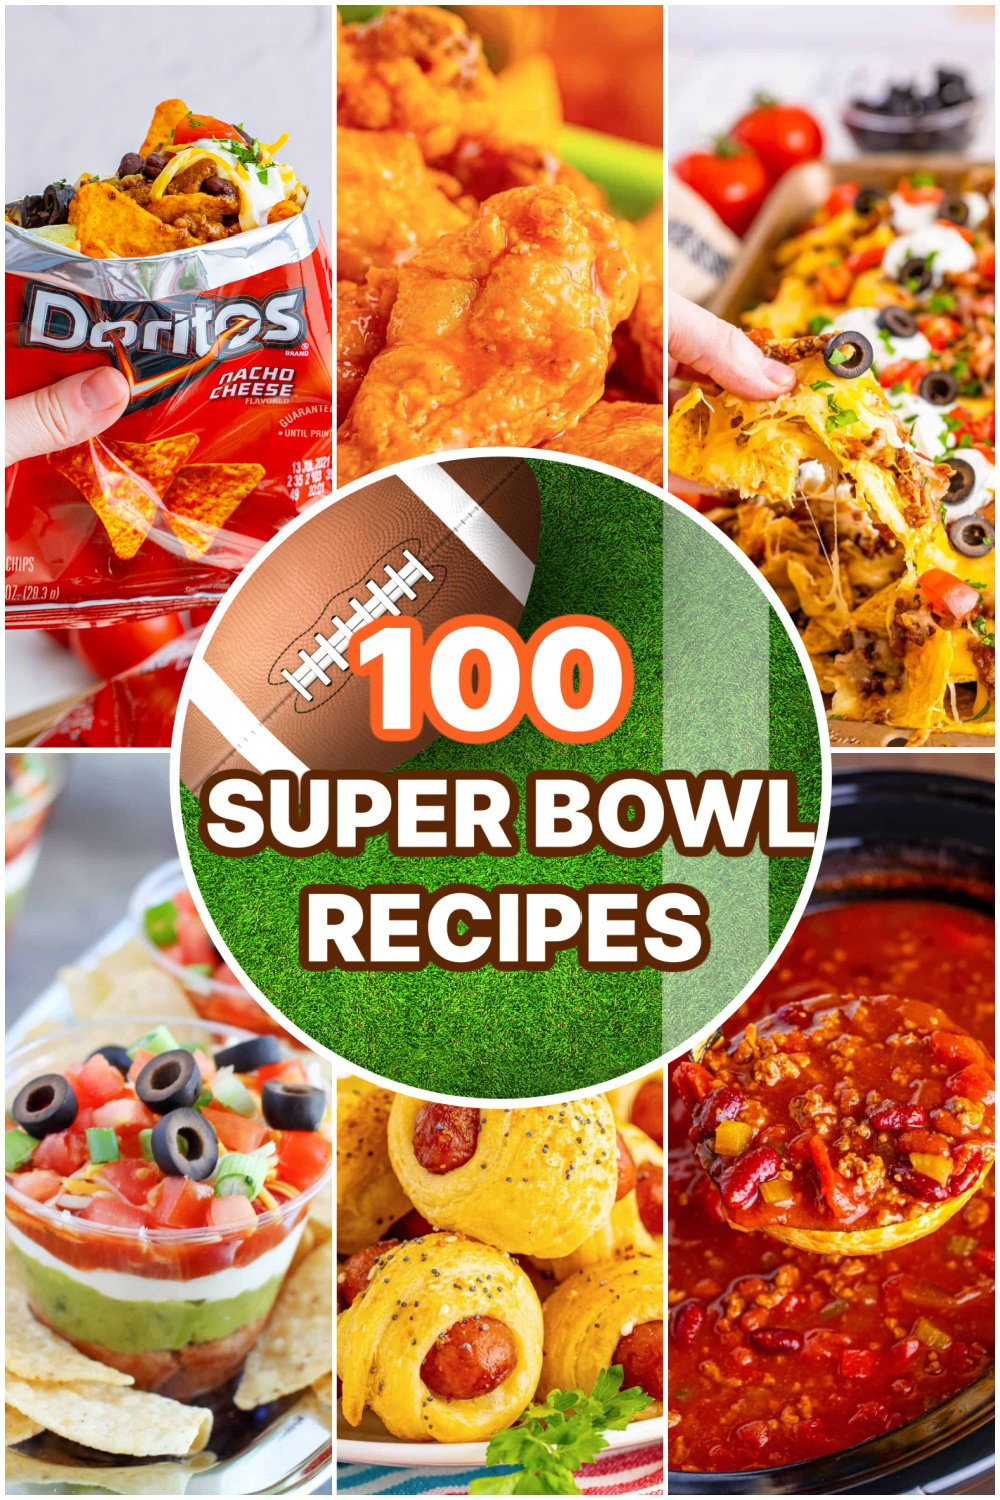 collage of 6 food photos with text in the middle that says "100 Super Bowl Recipes."